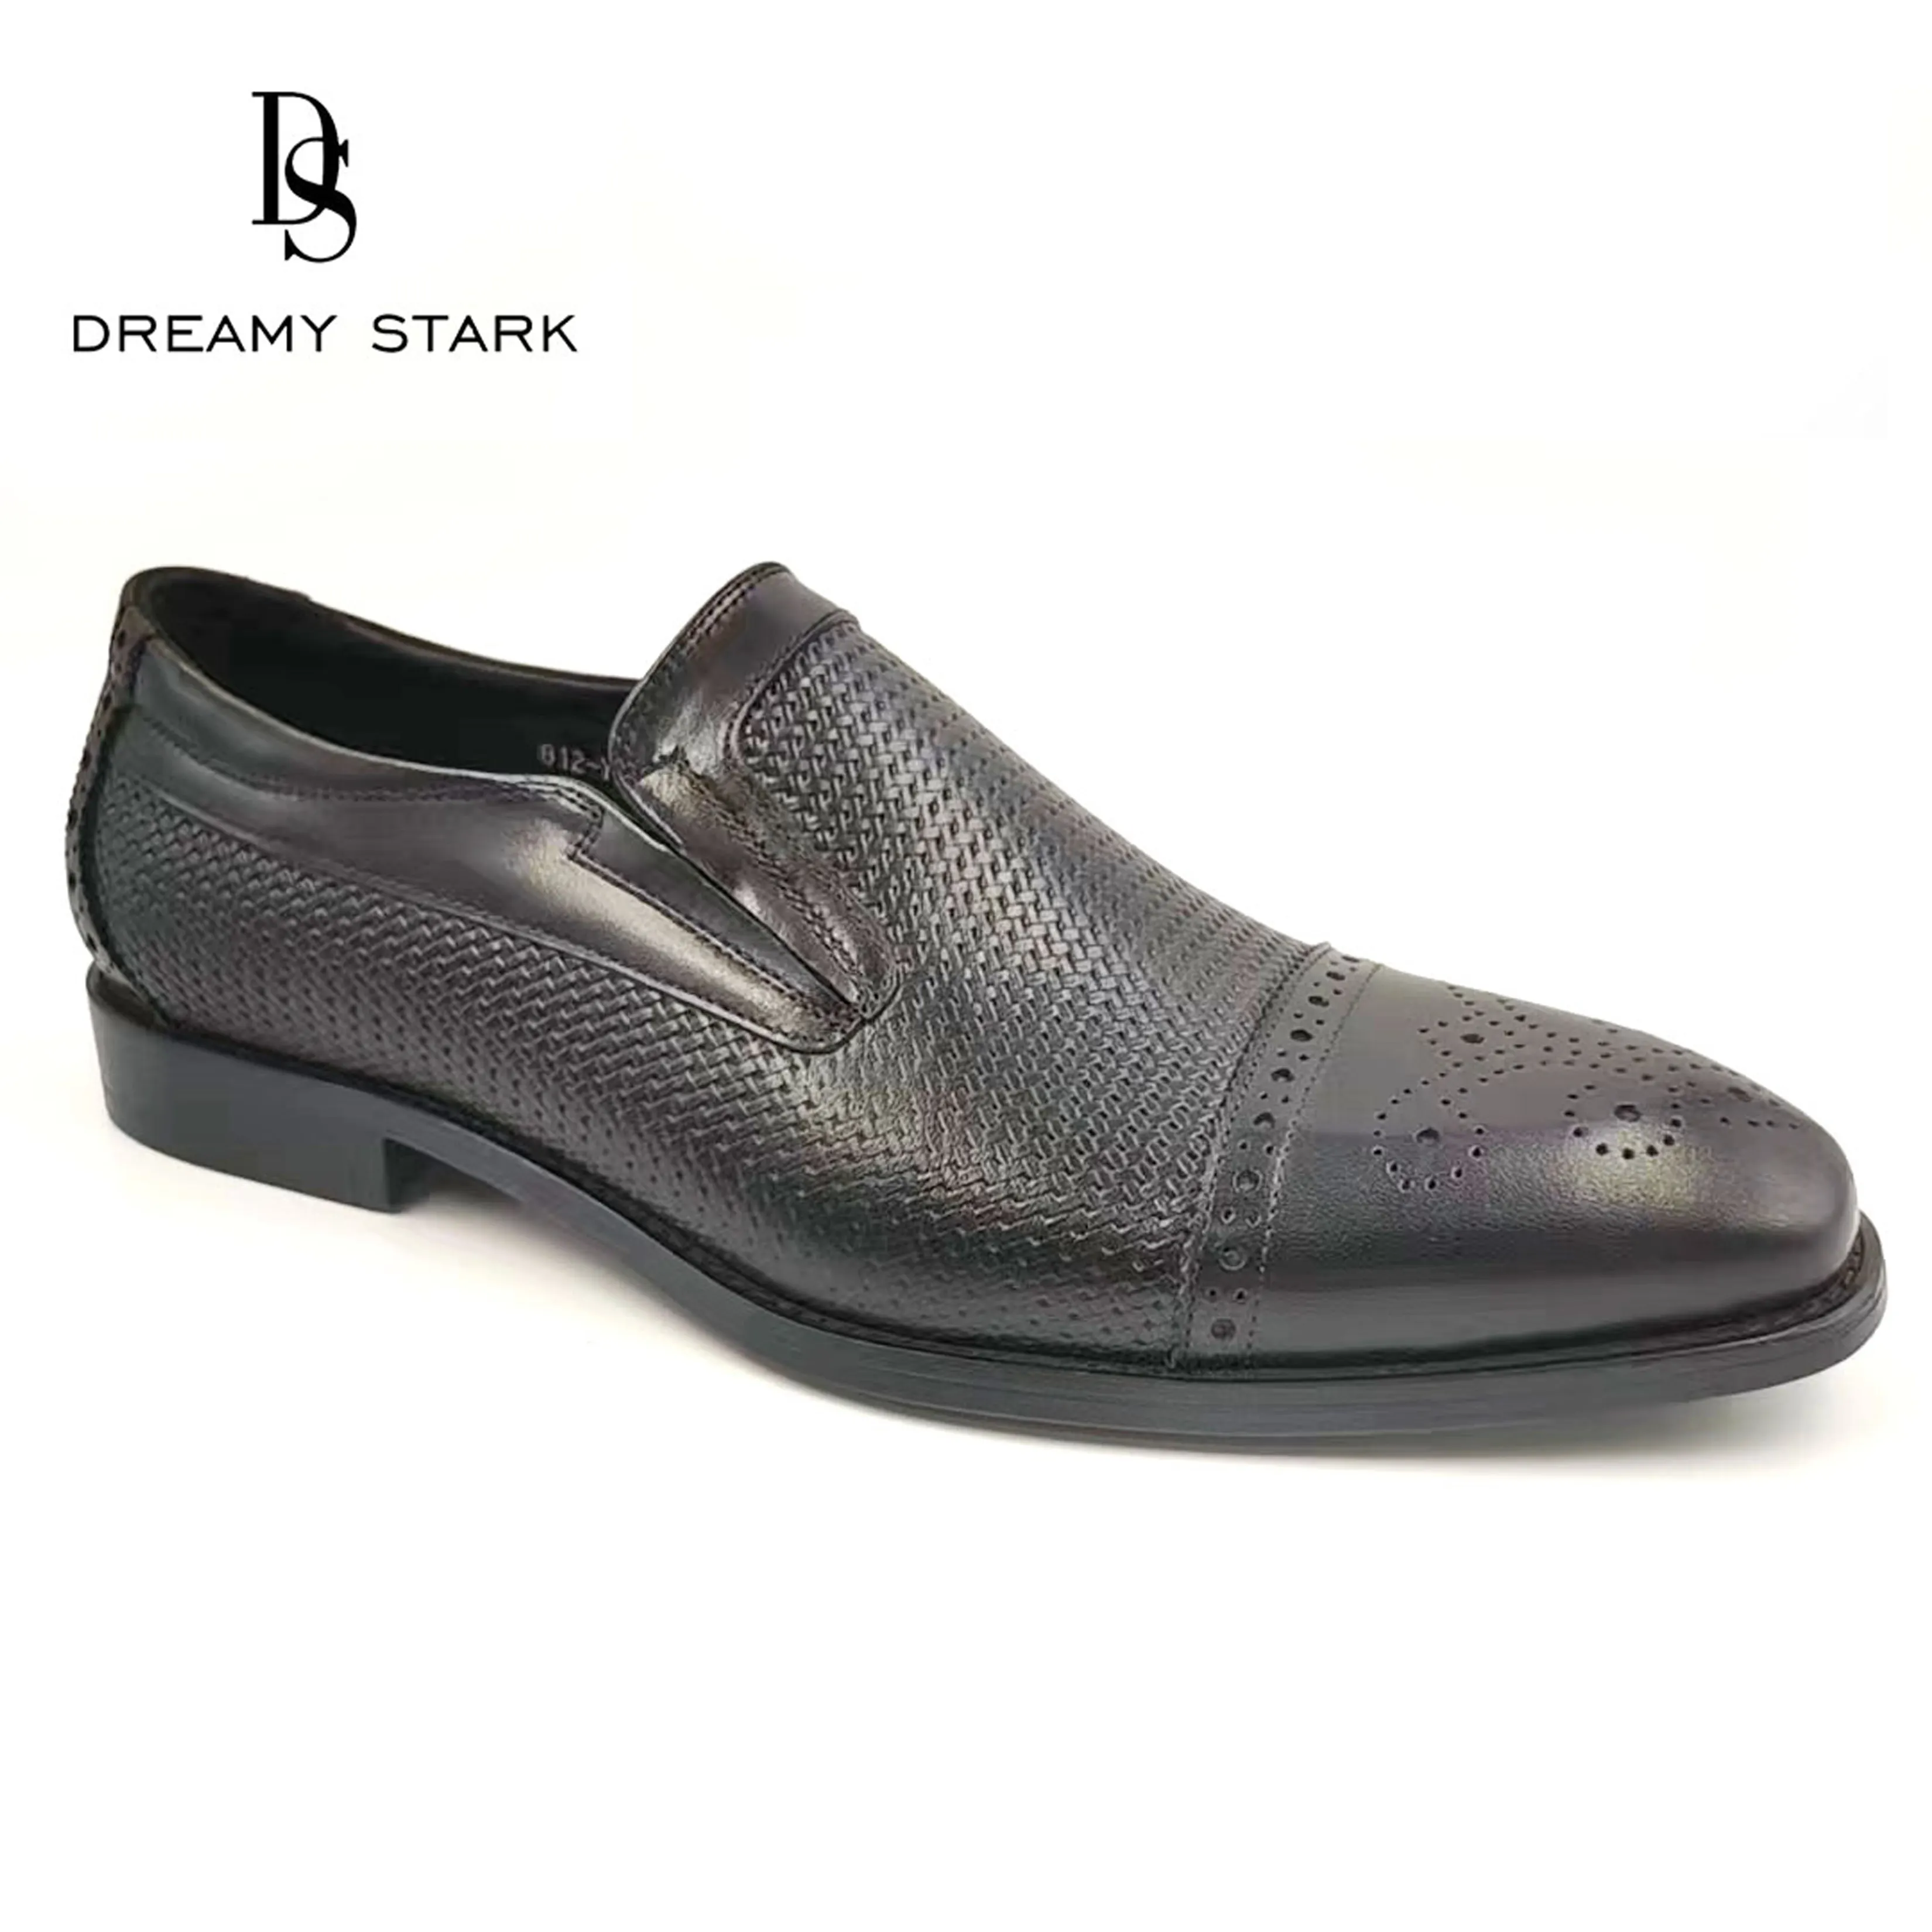 Dreamy Stark hand make genuine leather business wholesale loafers casual cutsider paired Men dress shoe